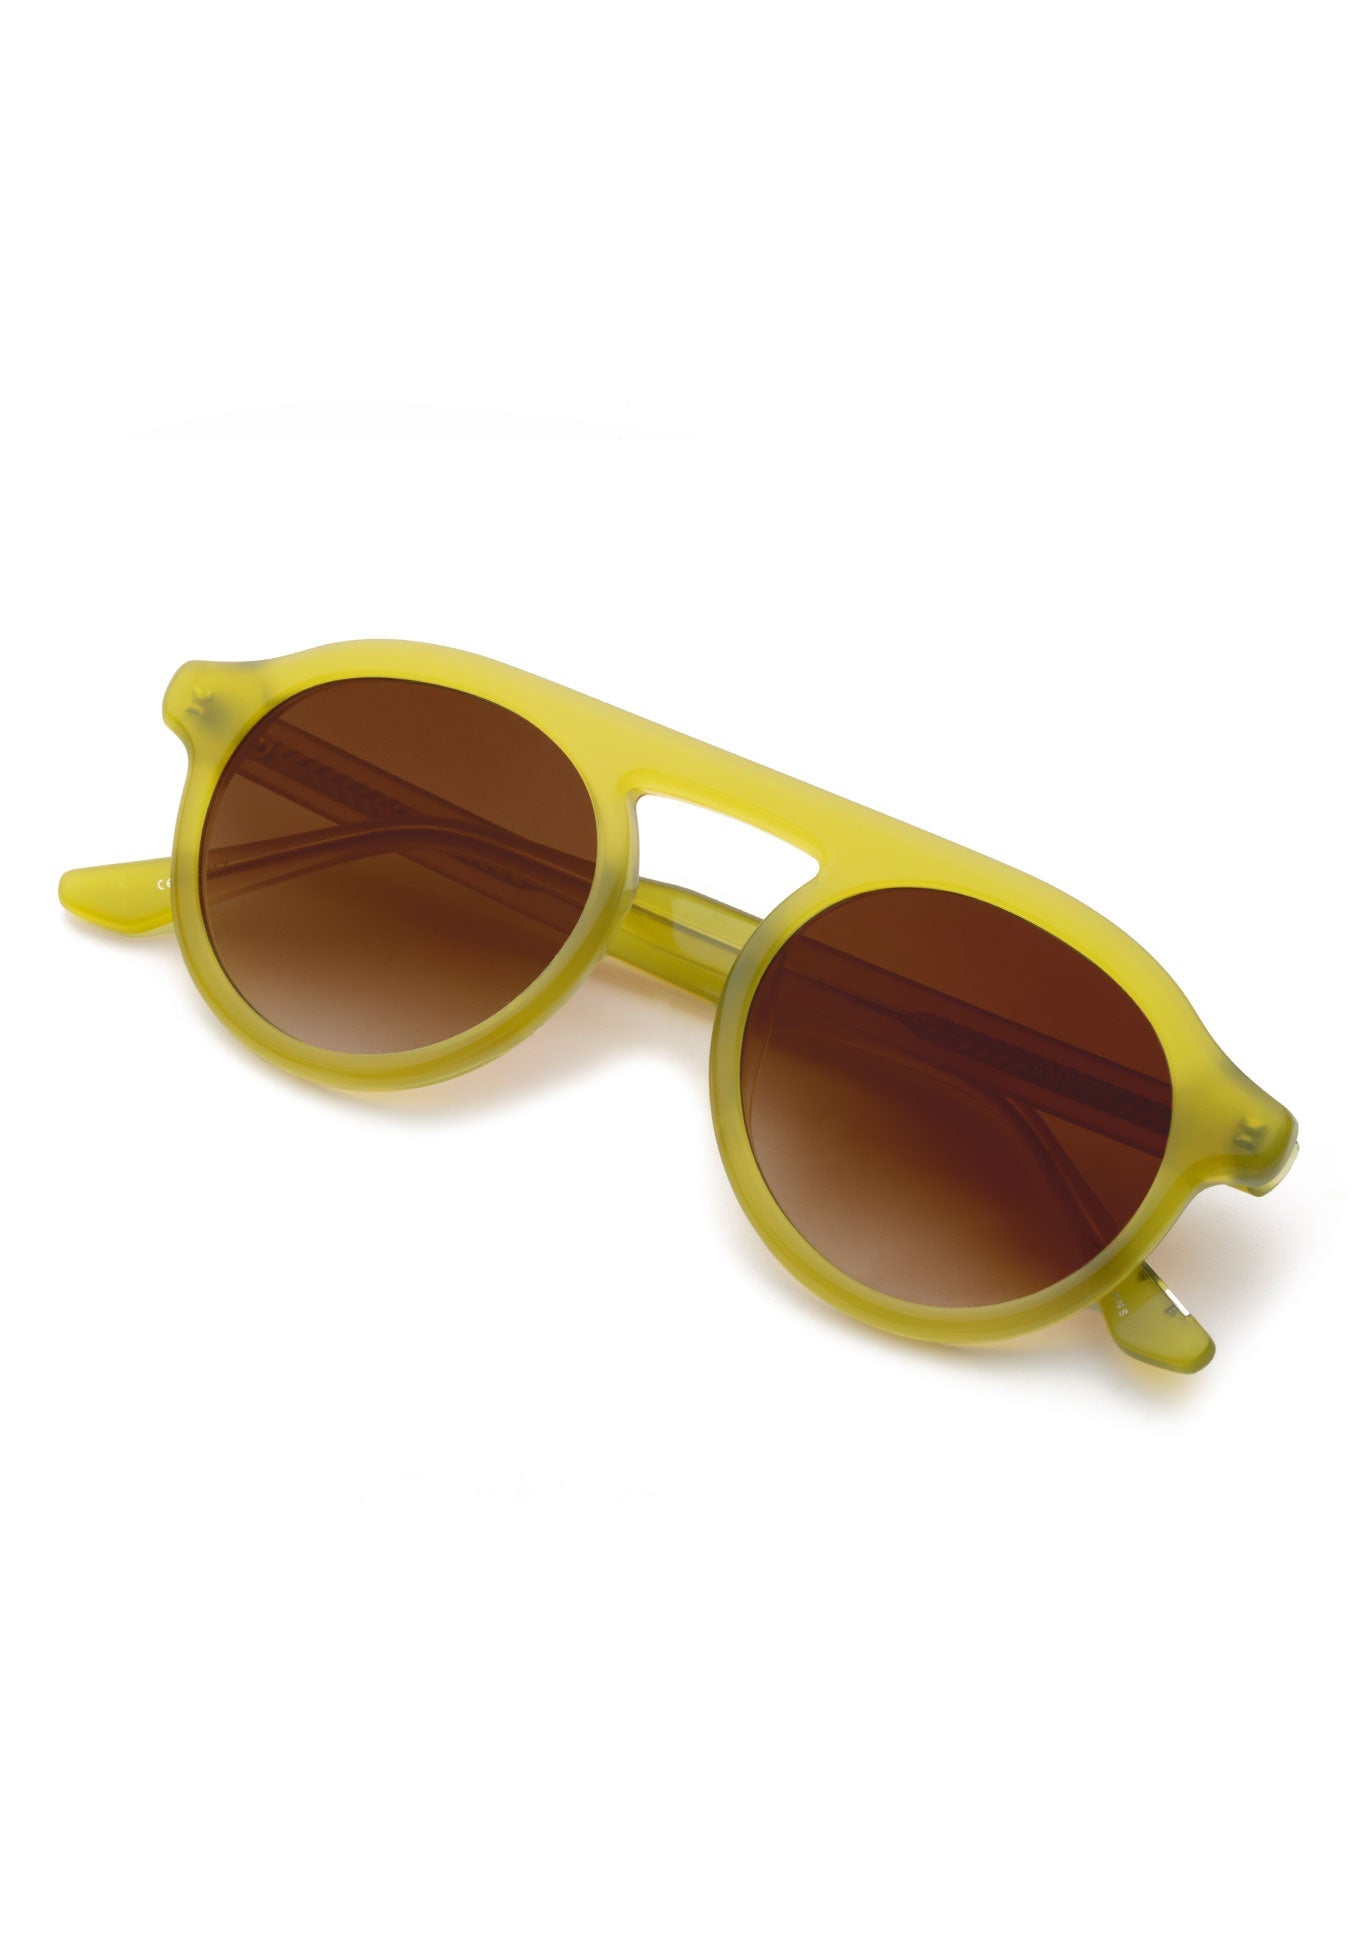 KREWE SUNGLASSES - CAMERON | Chartreuse handcrafted, luxury yellow acetate round frames